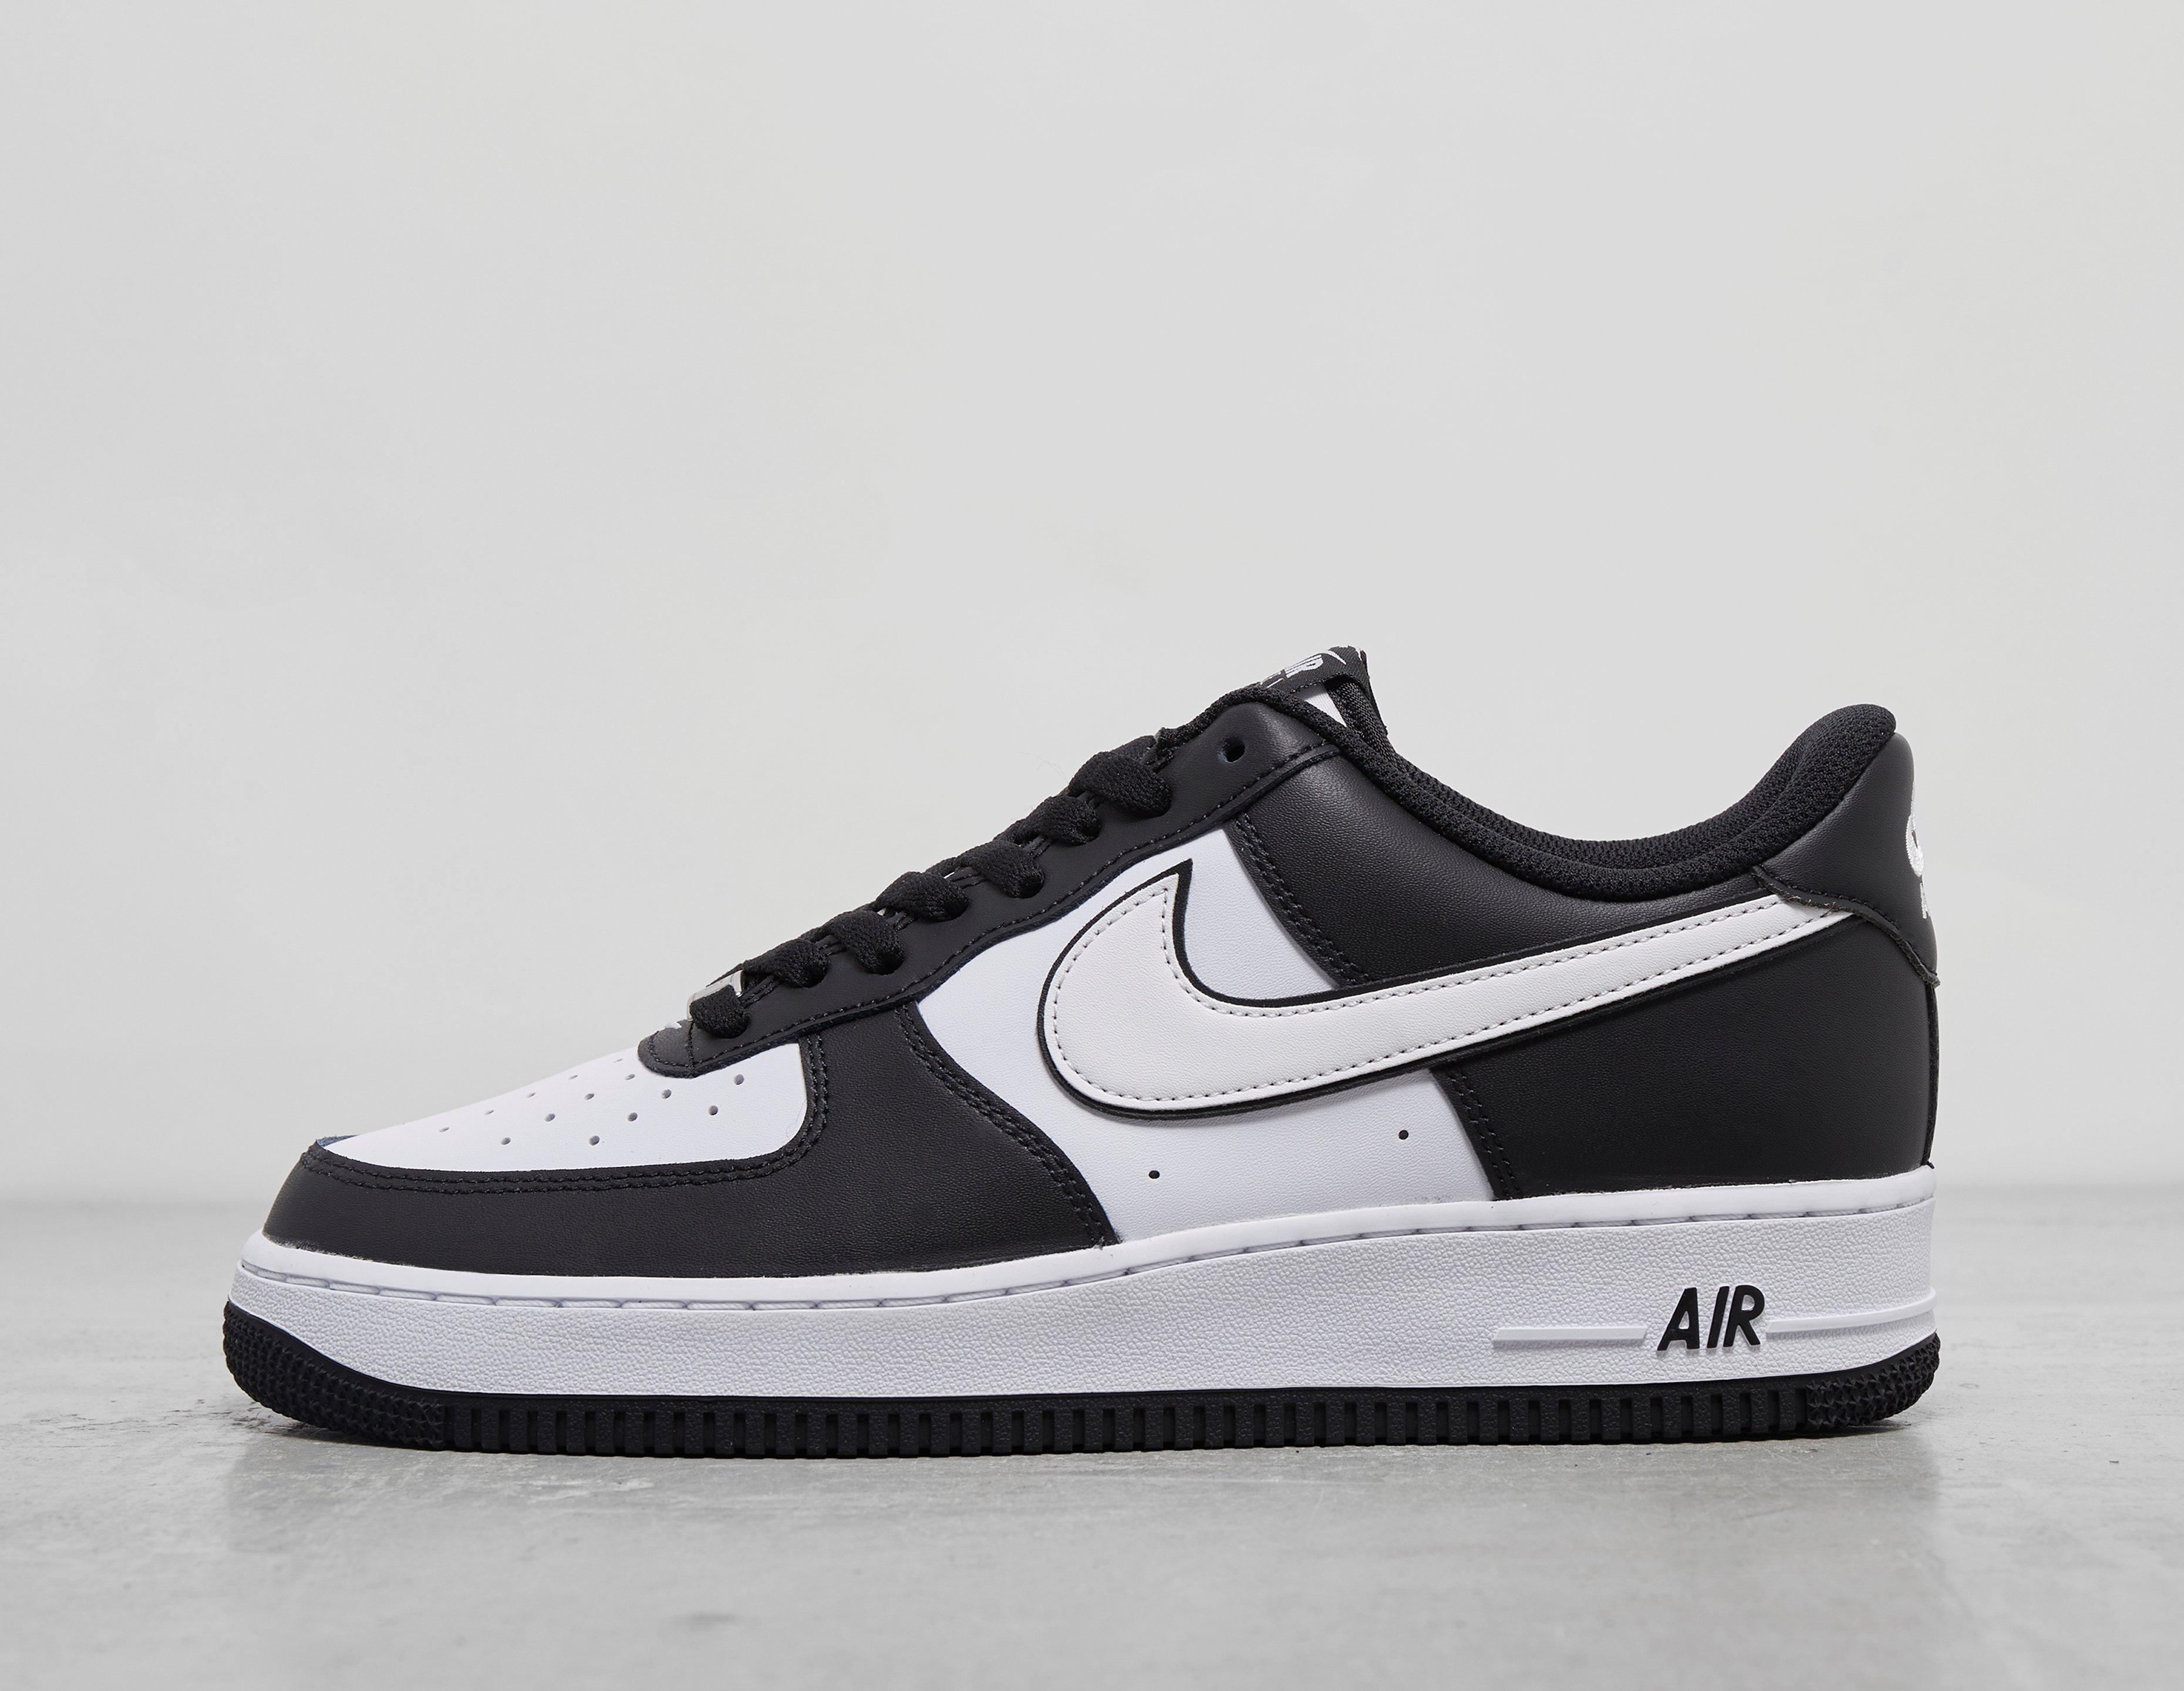 Custom Grey Air Force 1 Trainers, Af1 Nike 2 Toned Grey, Slate Grey / Wolf Grey Sneakers (All Sizes, Mens, Women's Junior Kids and Infants)